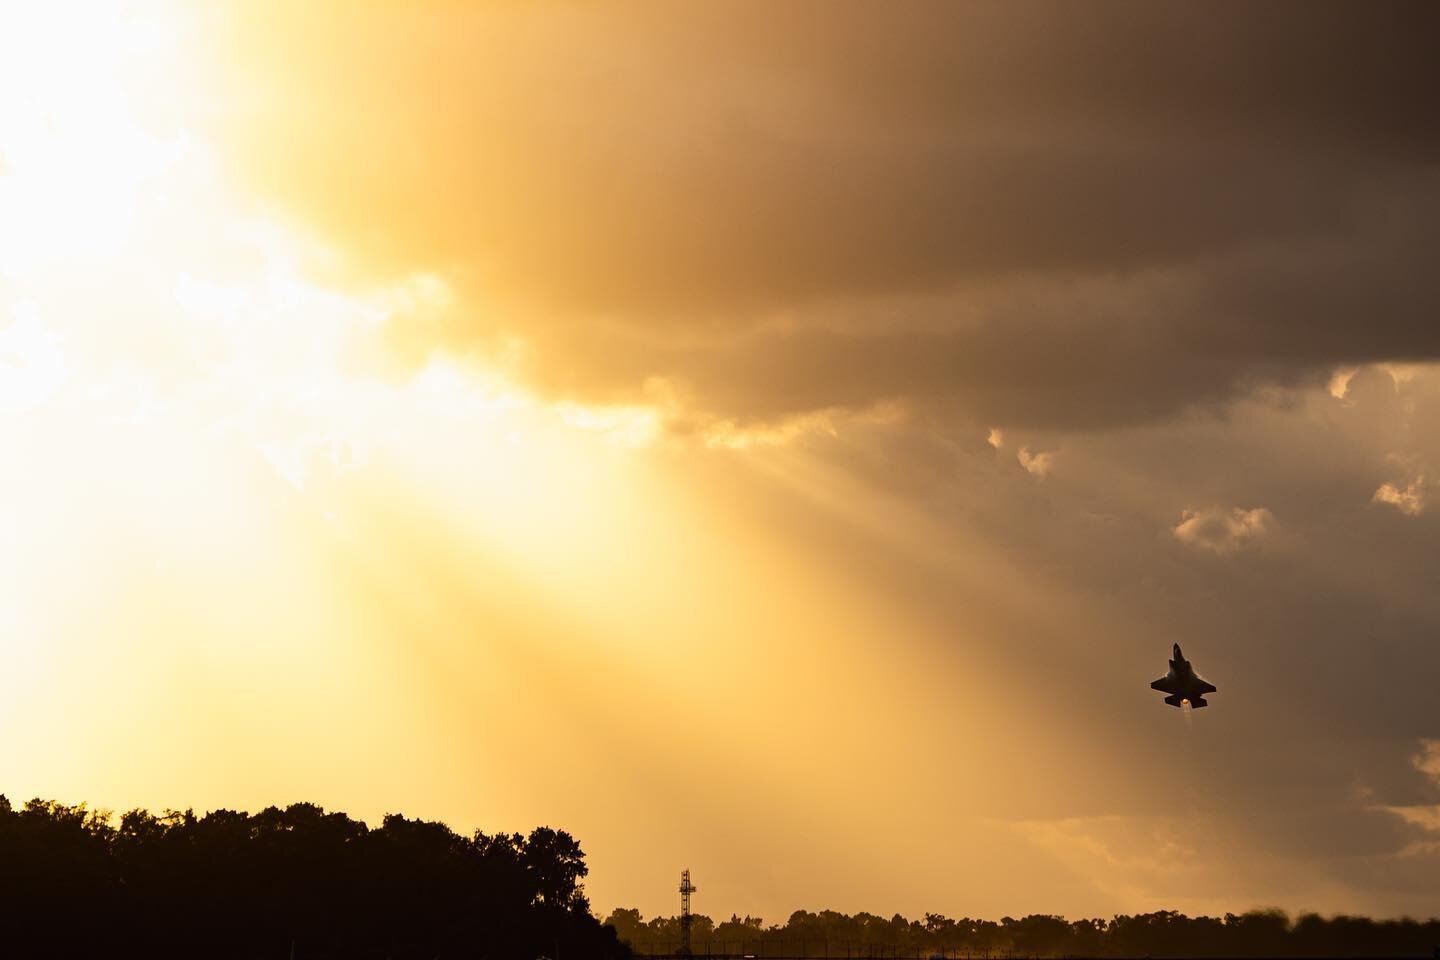 Sunset demos are just the best. 

-

-

#aviationphotography #snf23 #a#f35demoteam #f35a #airshow #goldenhour